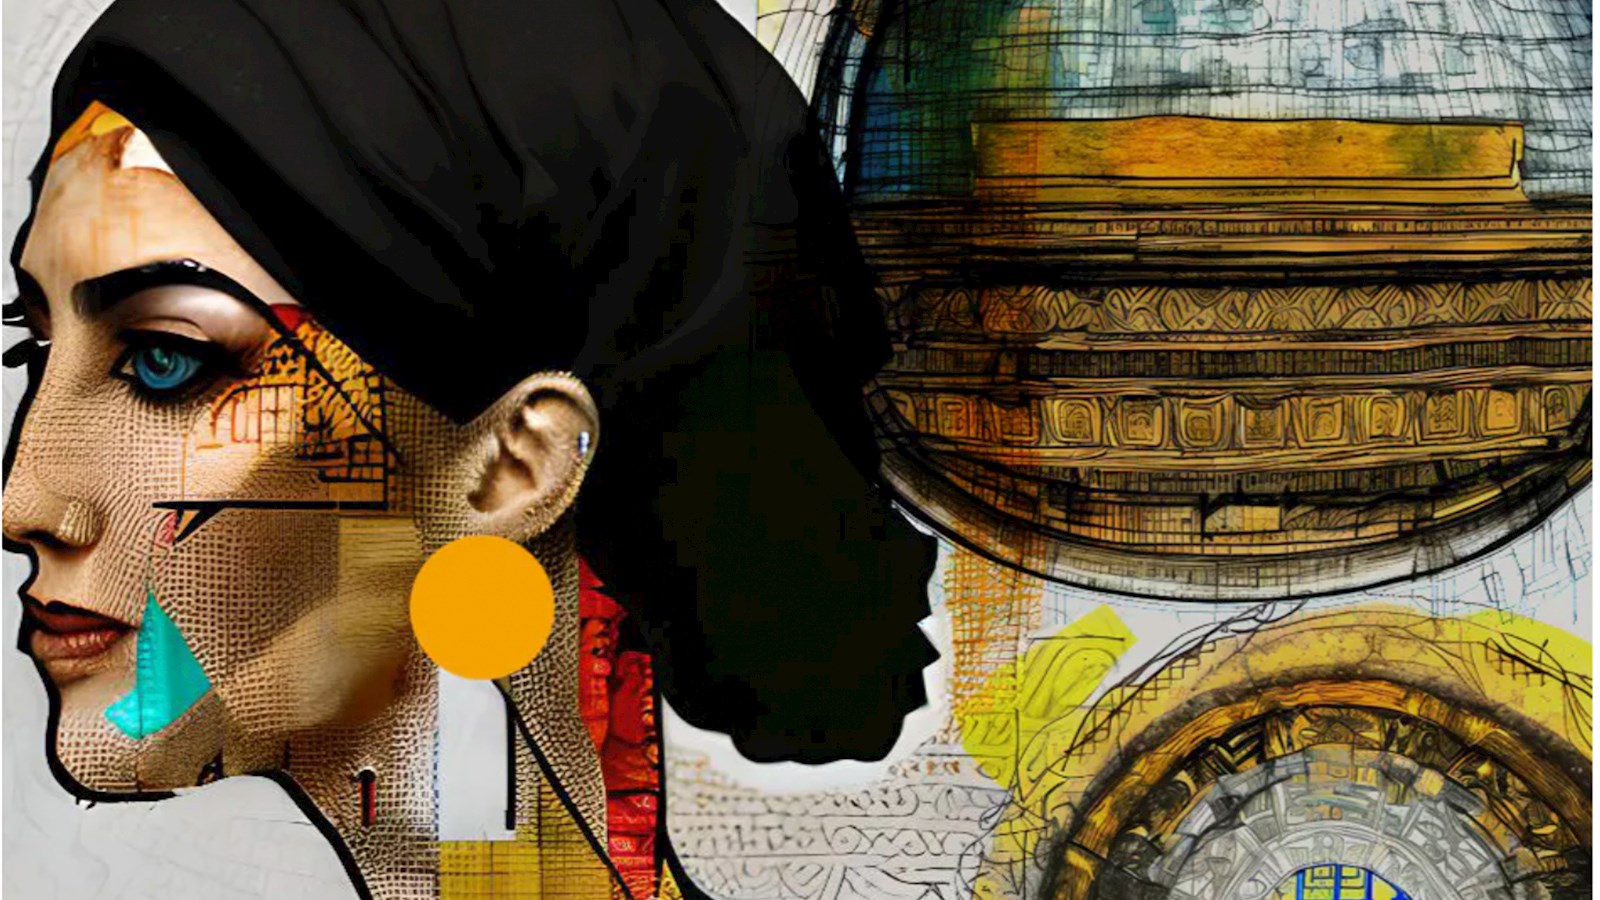 Profile of woman in collage-style 